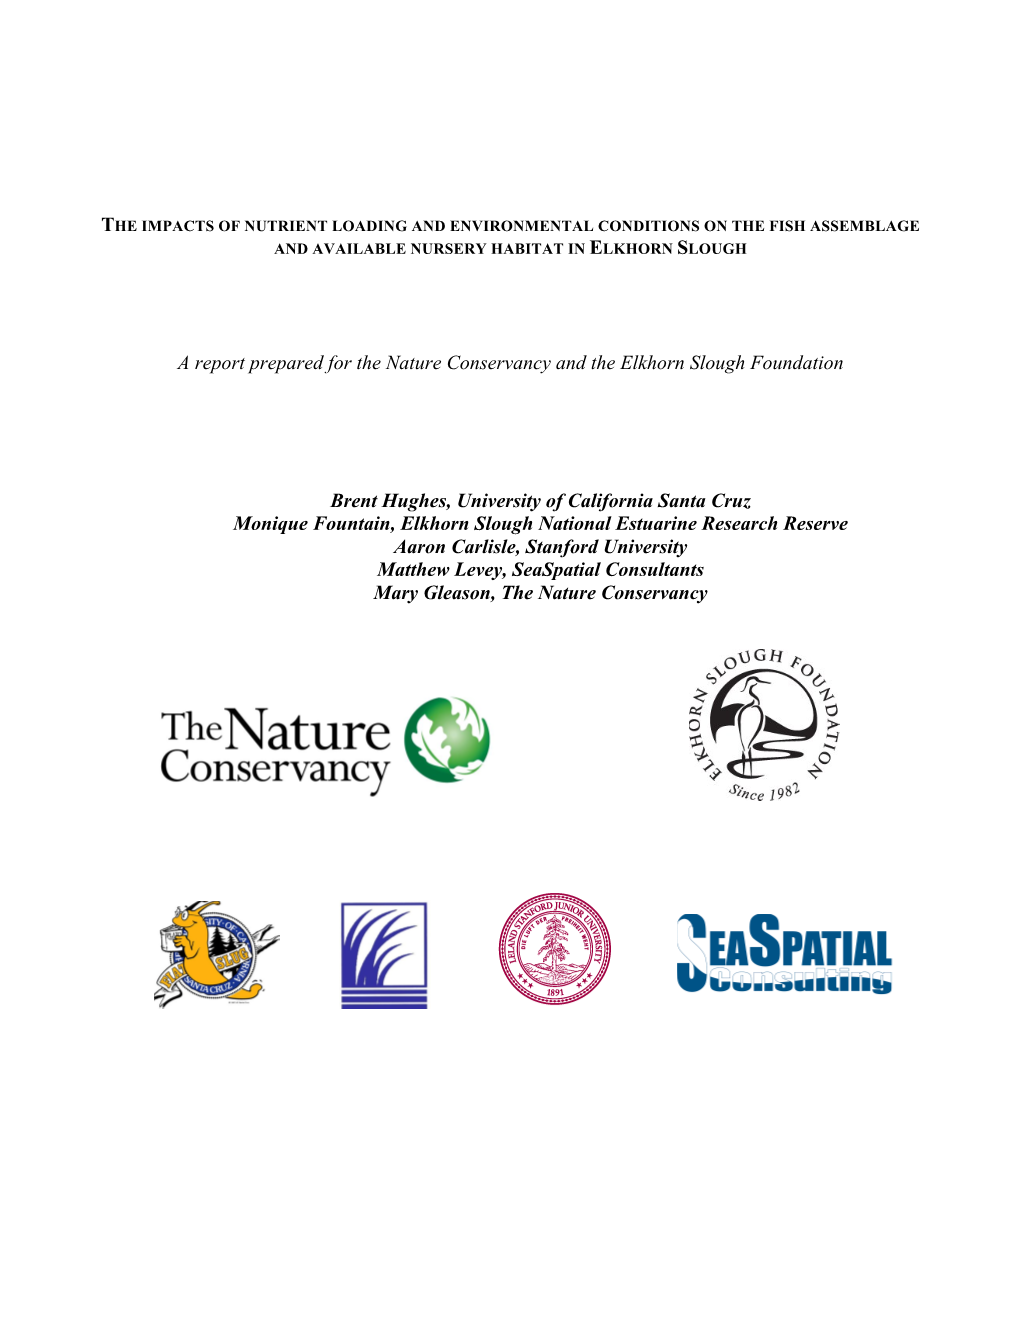 A Report Prepared for the Nature Conservancy and the Elkhorn Slough Foundation